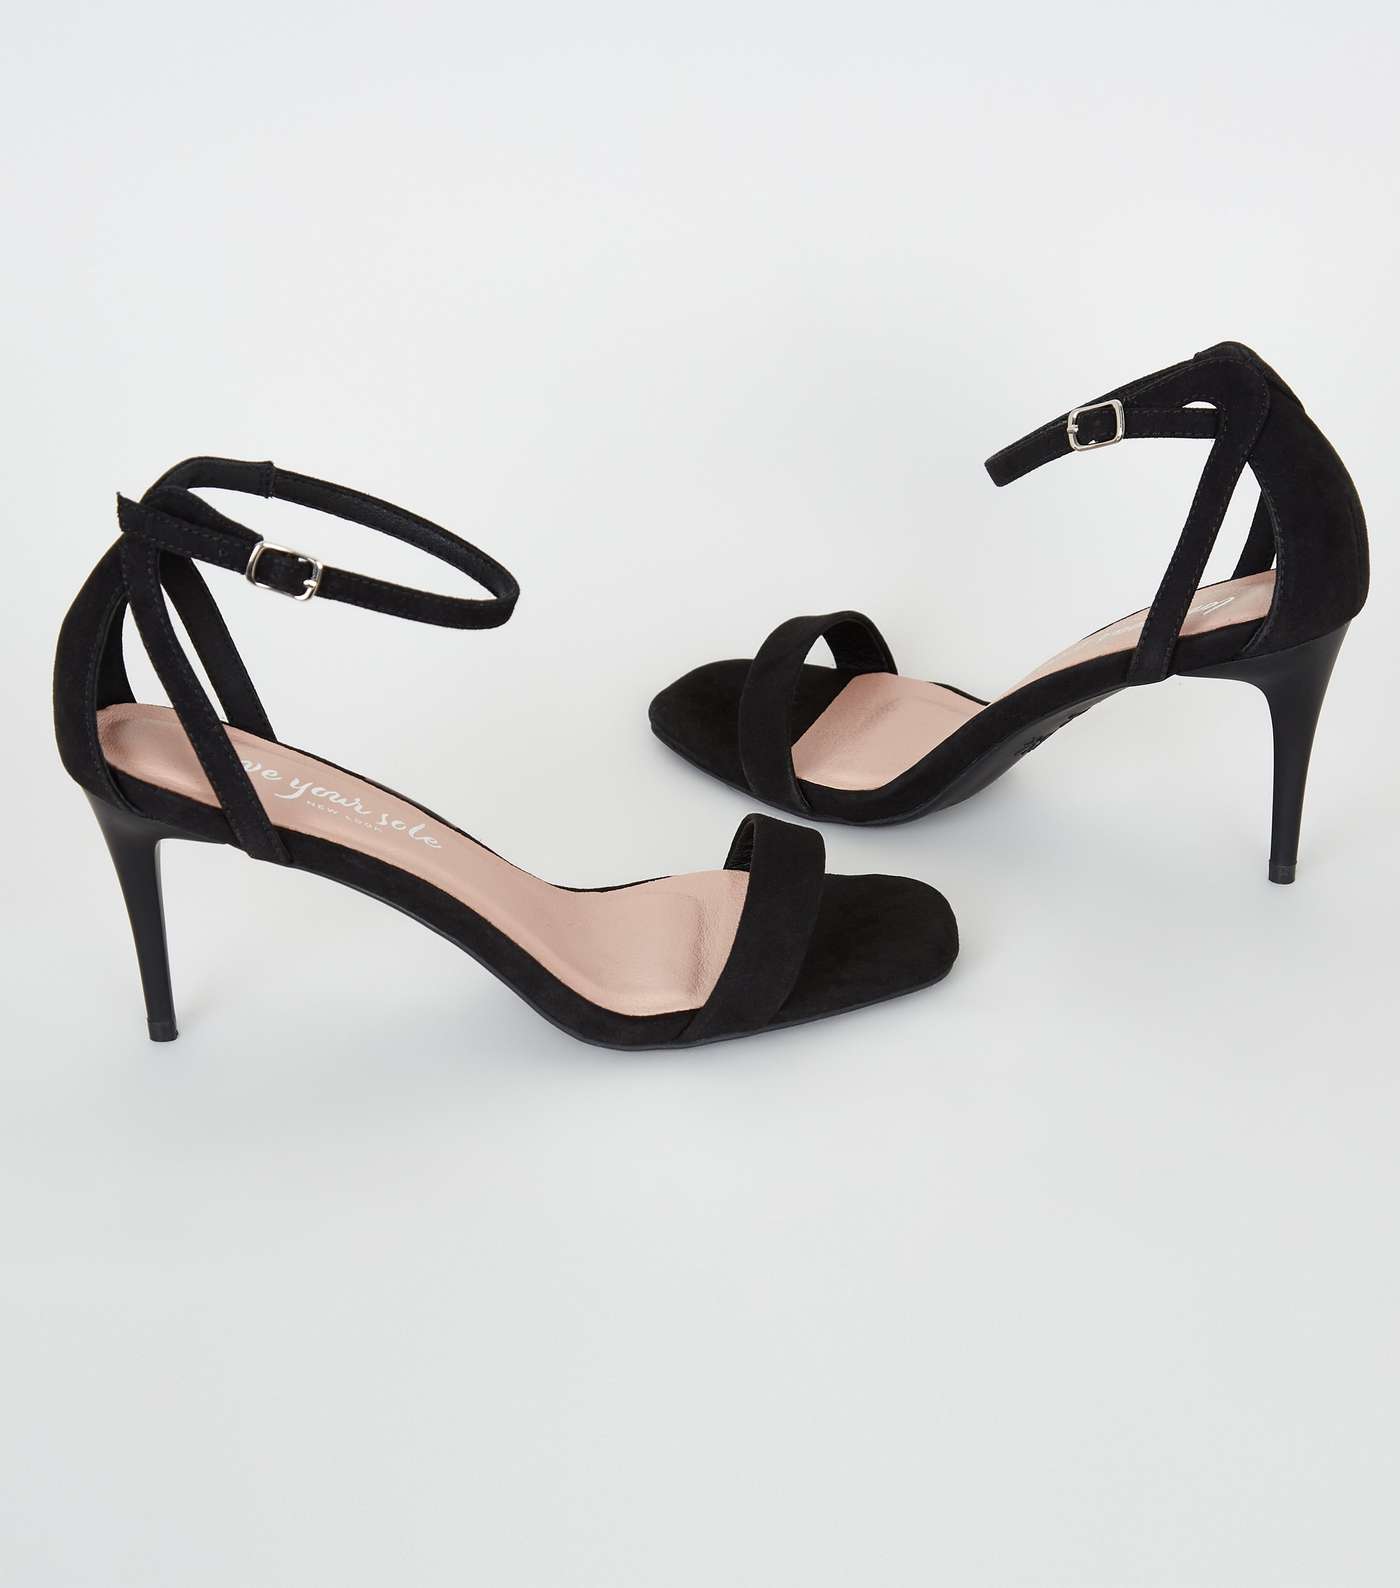 Black Suedette Barely There Stiletto Heels Image 3